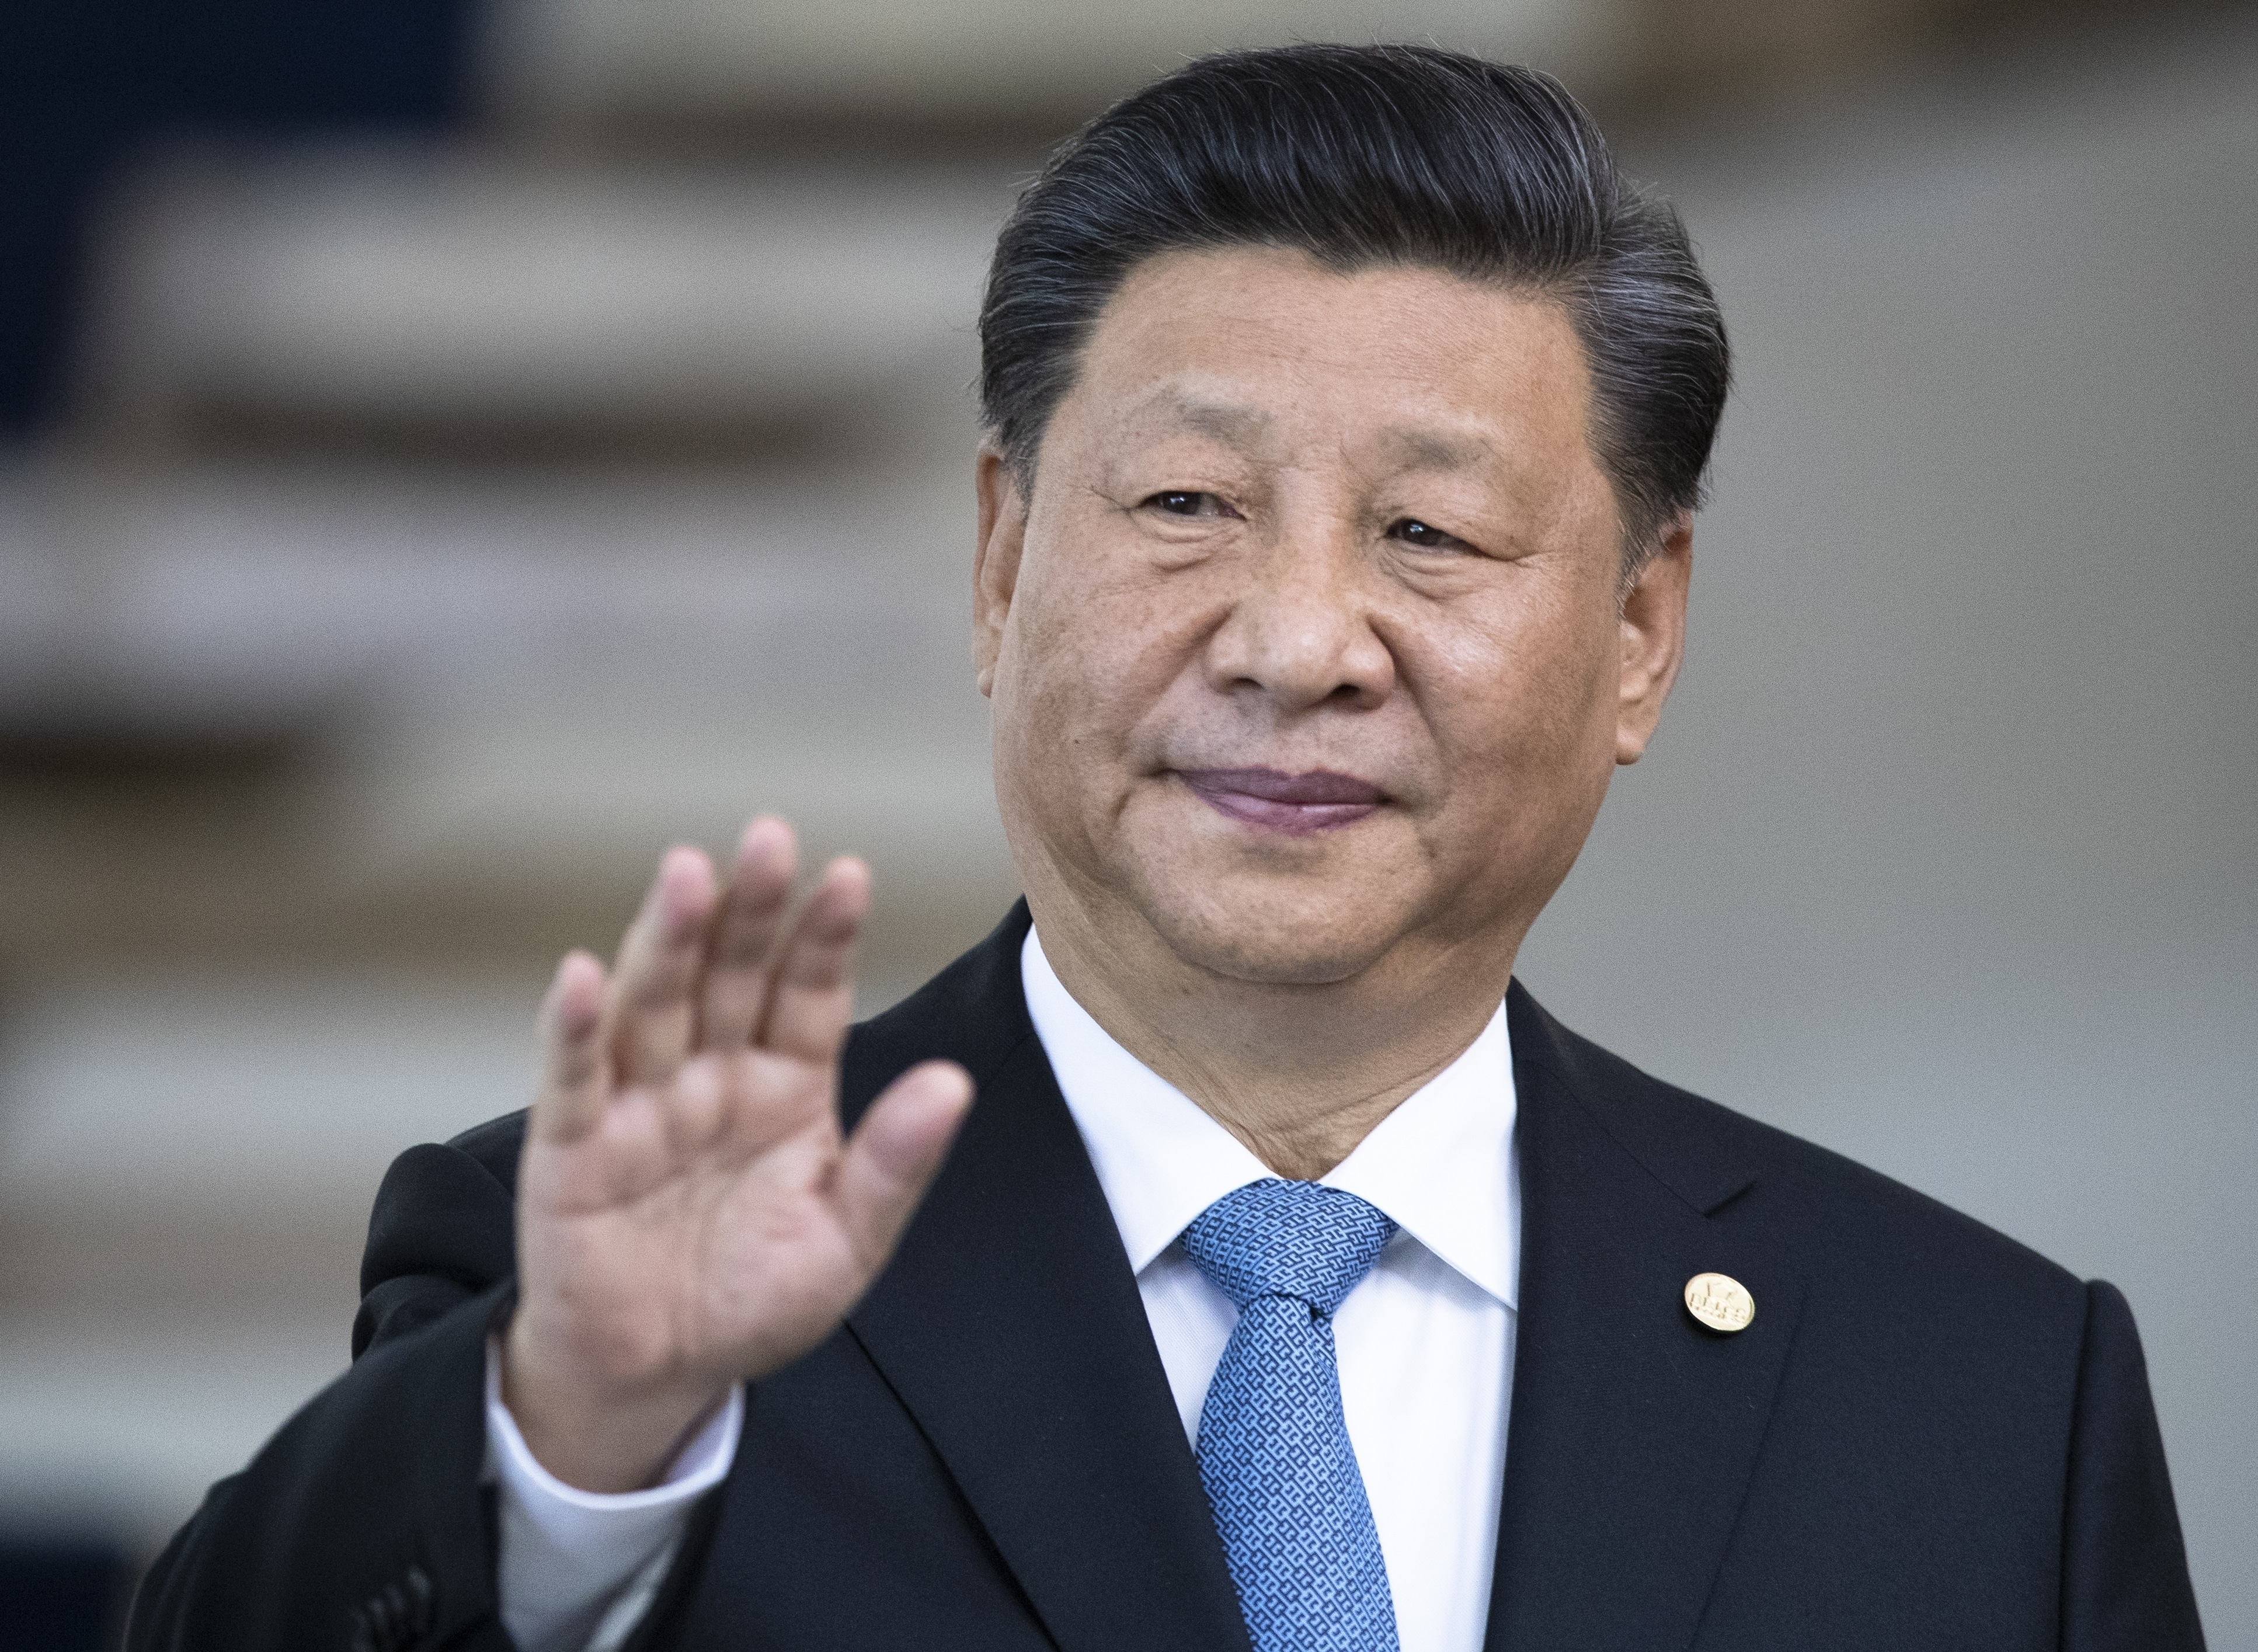 EXPLAINER: Why Is Xi Jinping’s Central Asia Trip Important?